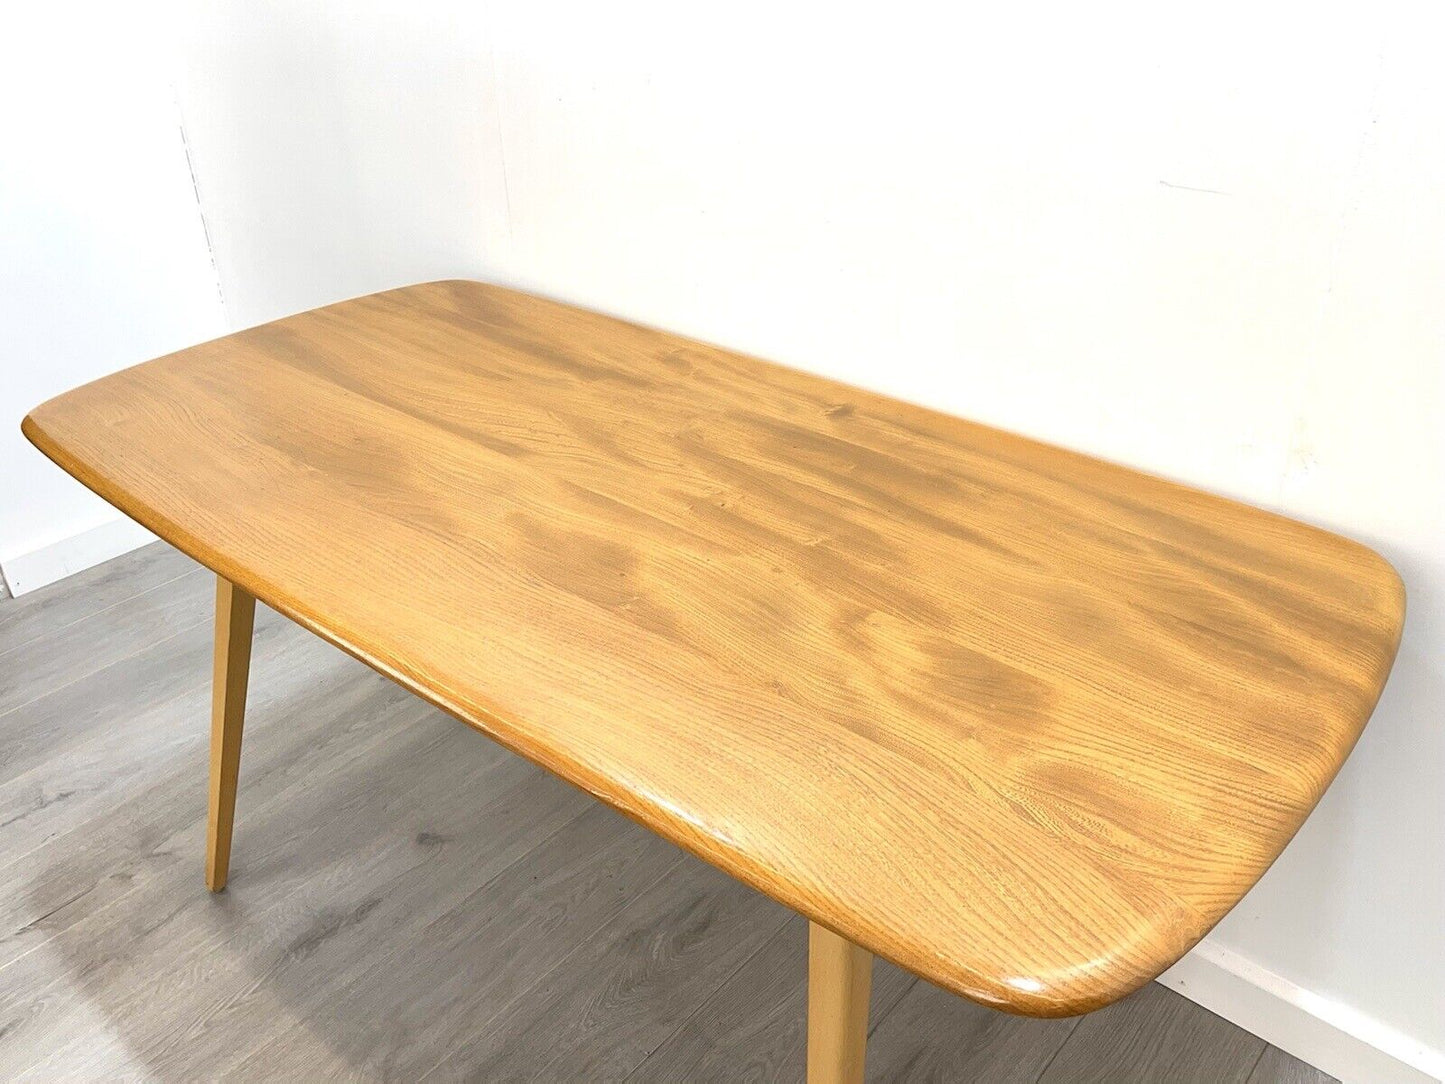 Ercol 382, Mid Century Dining Table - Blue Label 1960’s